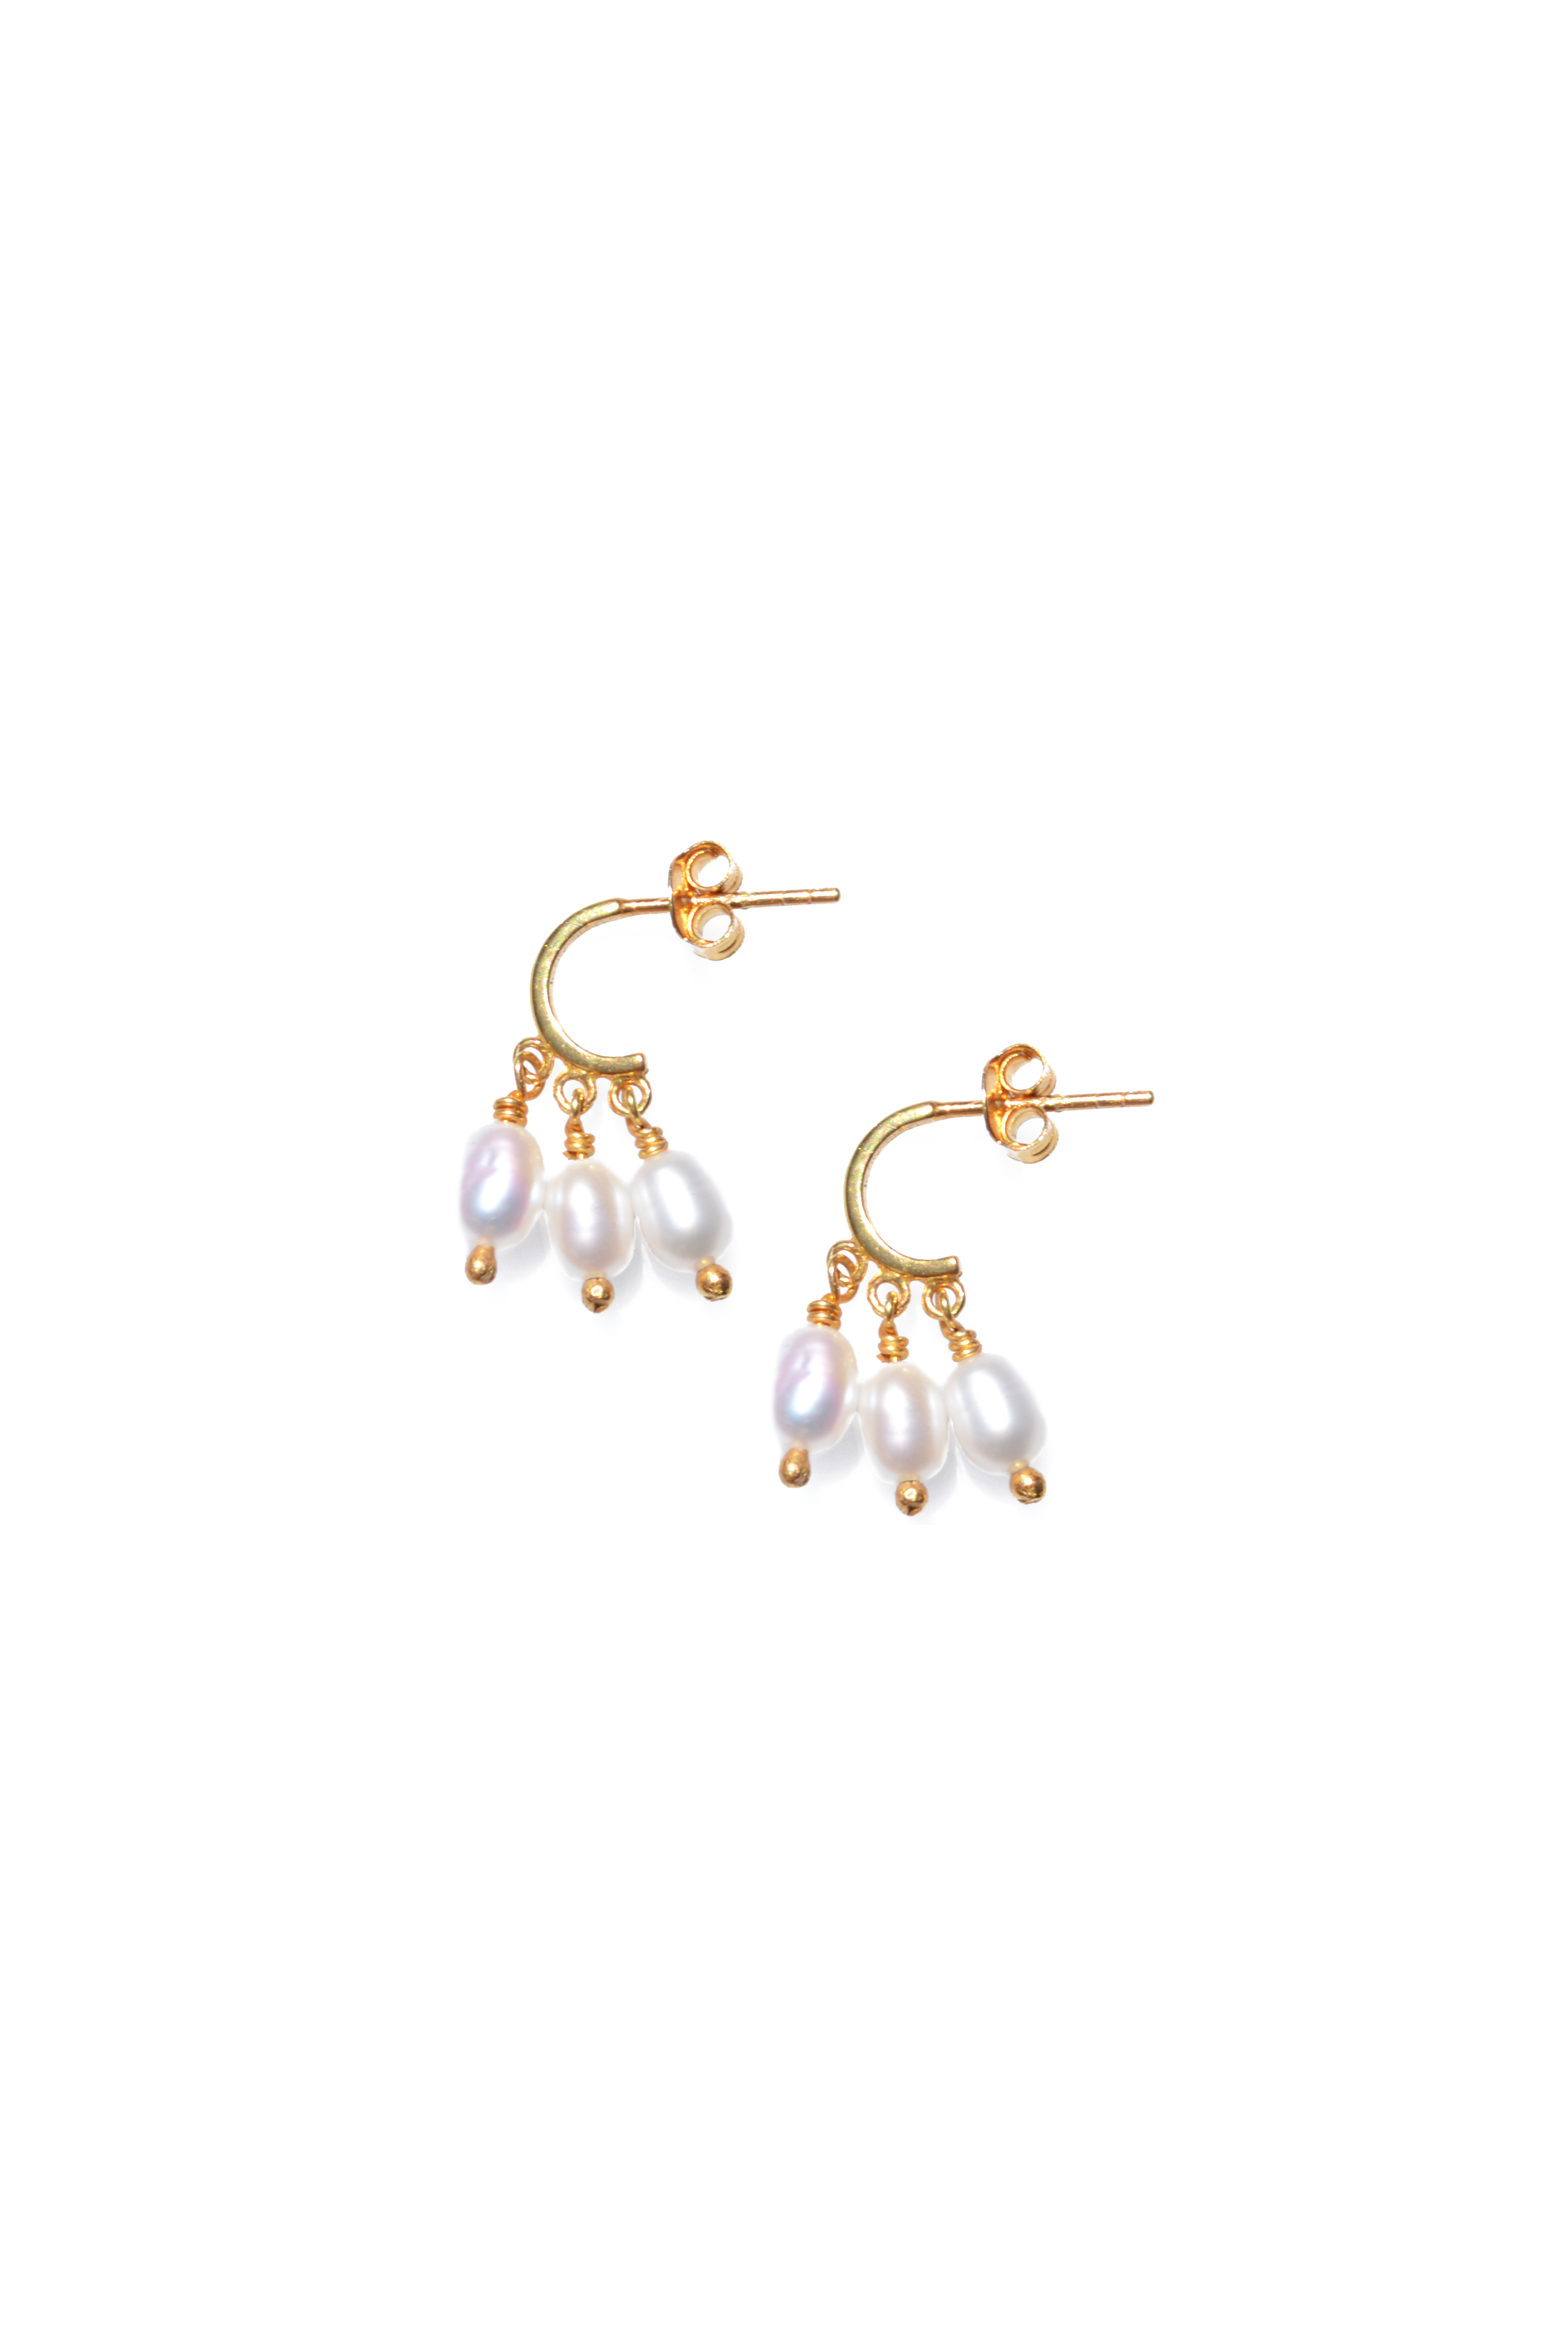 THE OTHER SIDE | Mena Pearl Studs | $89